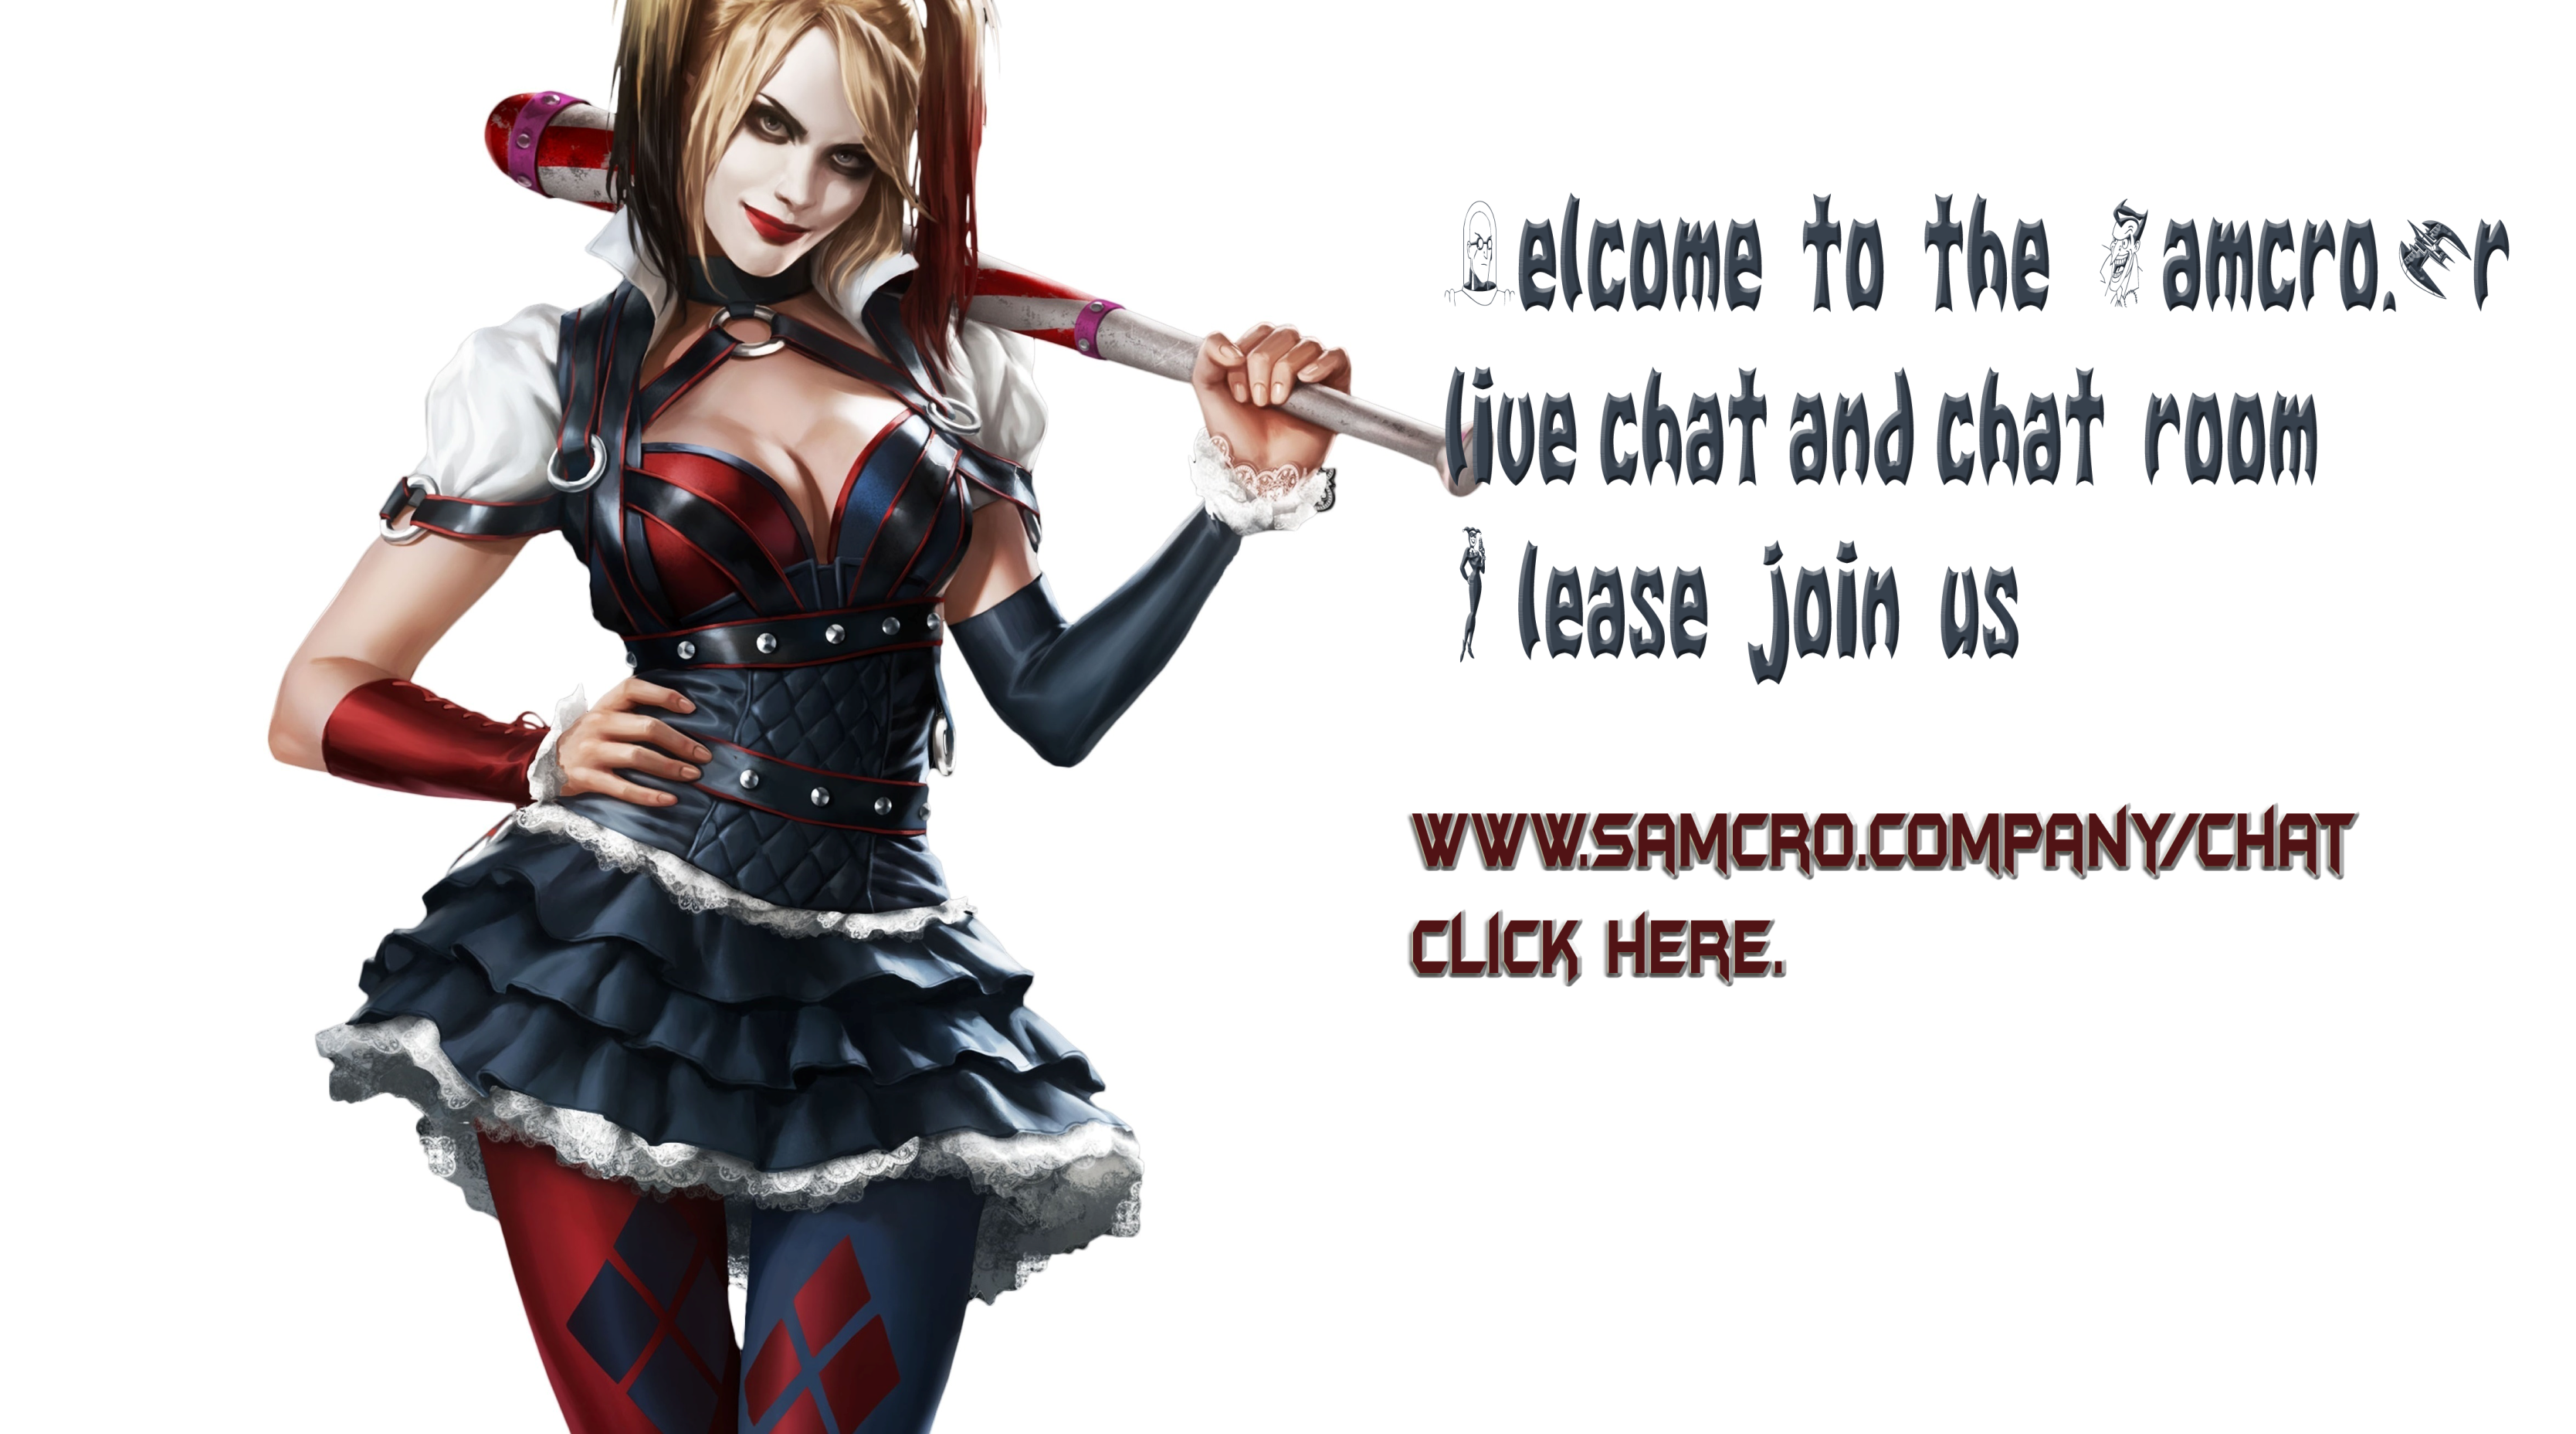 welcome to the chat samcro.fr live chat